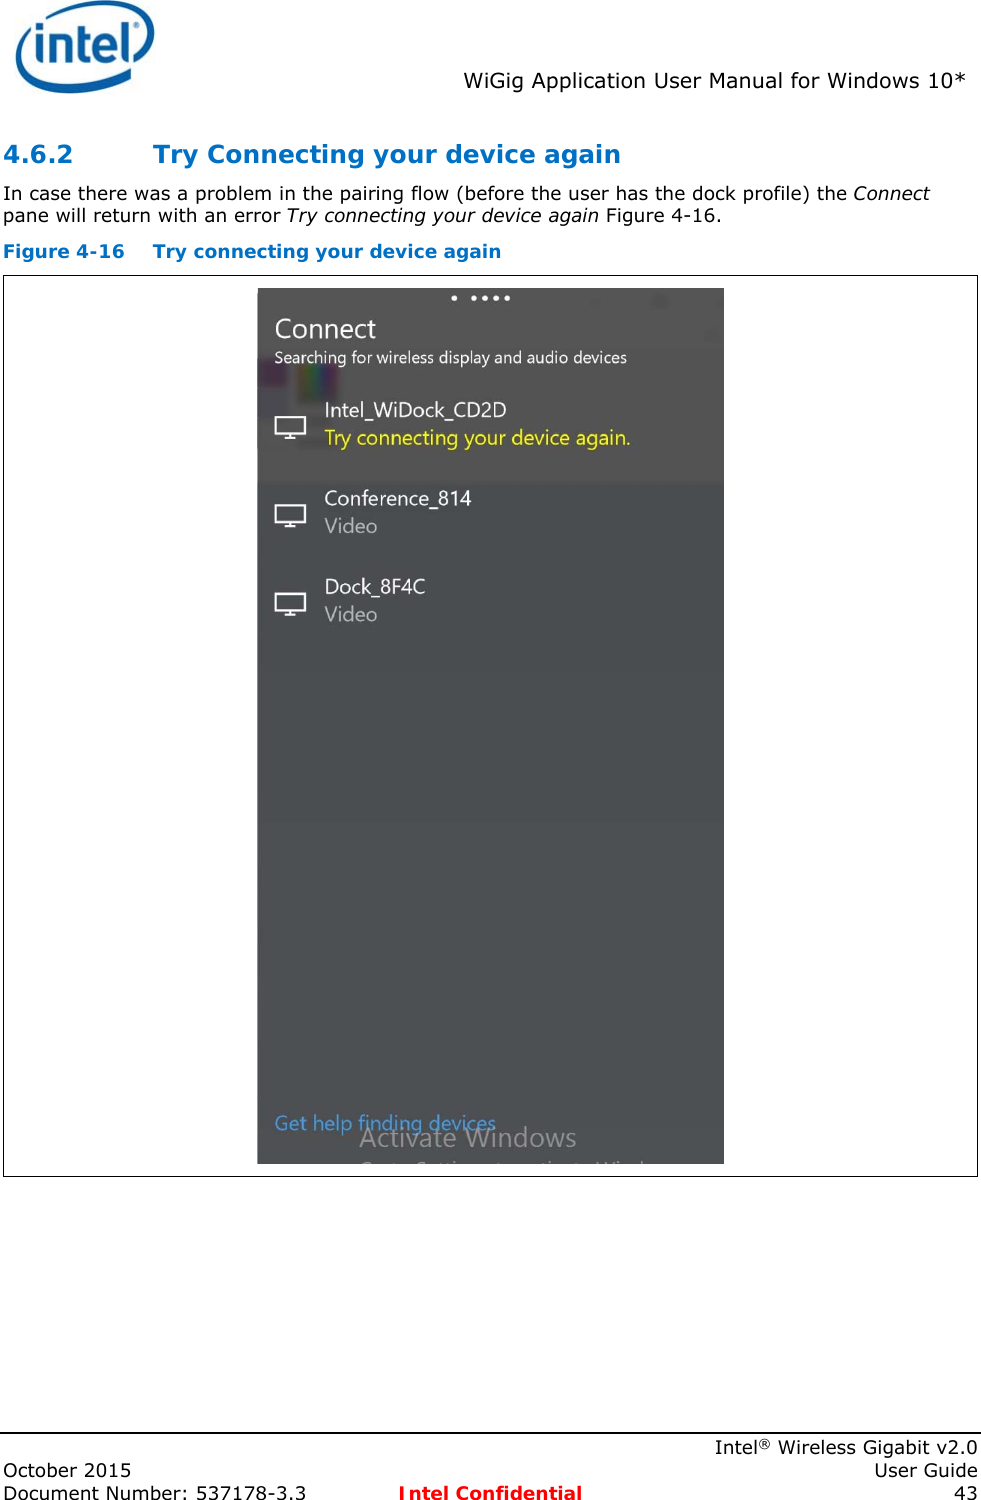  WiGig Application User Manual for Windows 10*    Intel® Wireless Gigabit v2.0 October 2015    User Guide Document Number: 537178-3.3  Intel Confidential 43 4.6.2 Try Connecting your device again In case there was a problem in the pairing flow (before the user has the dock profile) the Connect pane will return with an error Try connecting your device again Figure 4-16. Figure 4-16  Try connecting your device again  